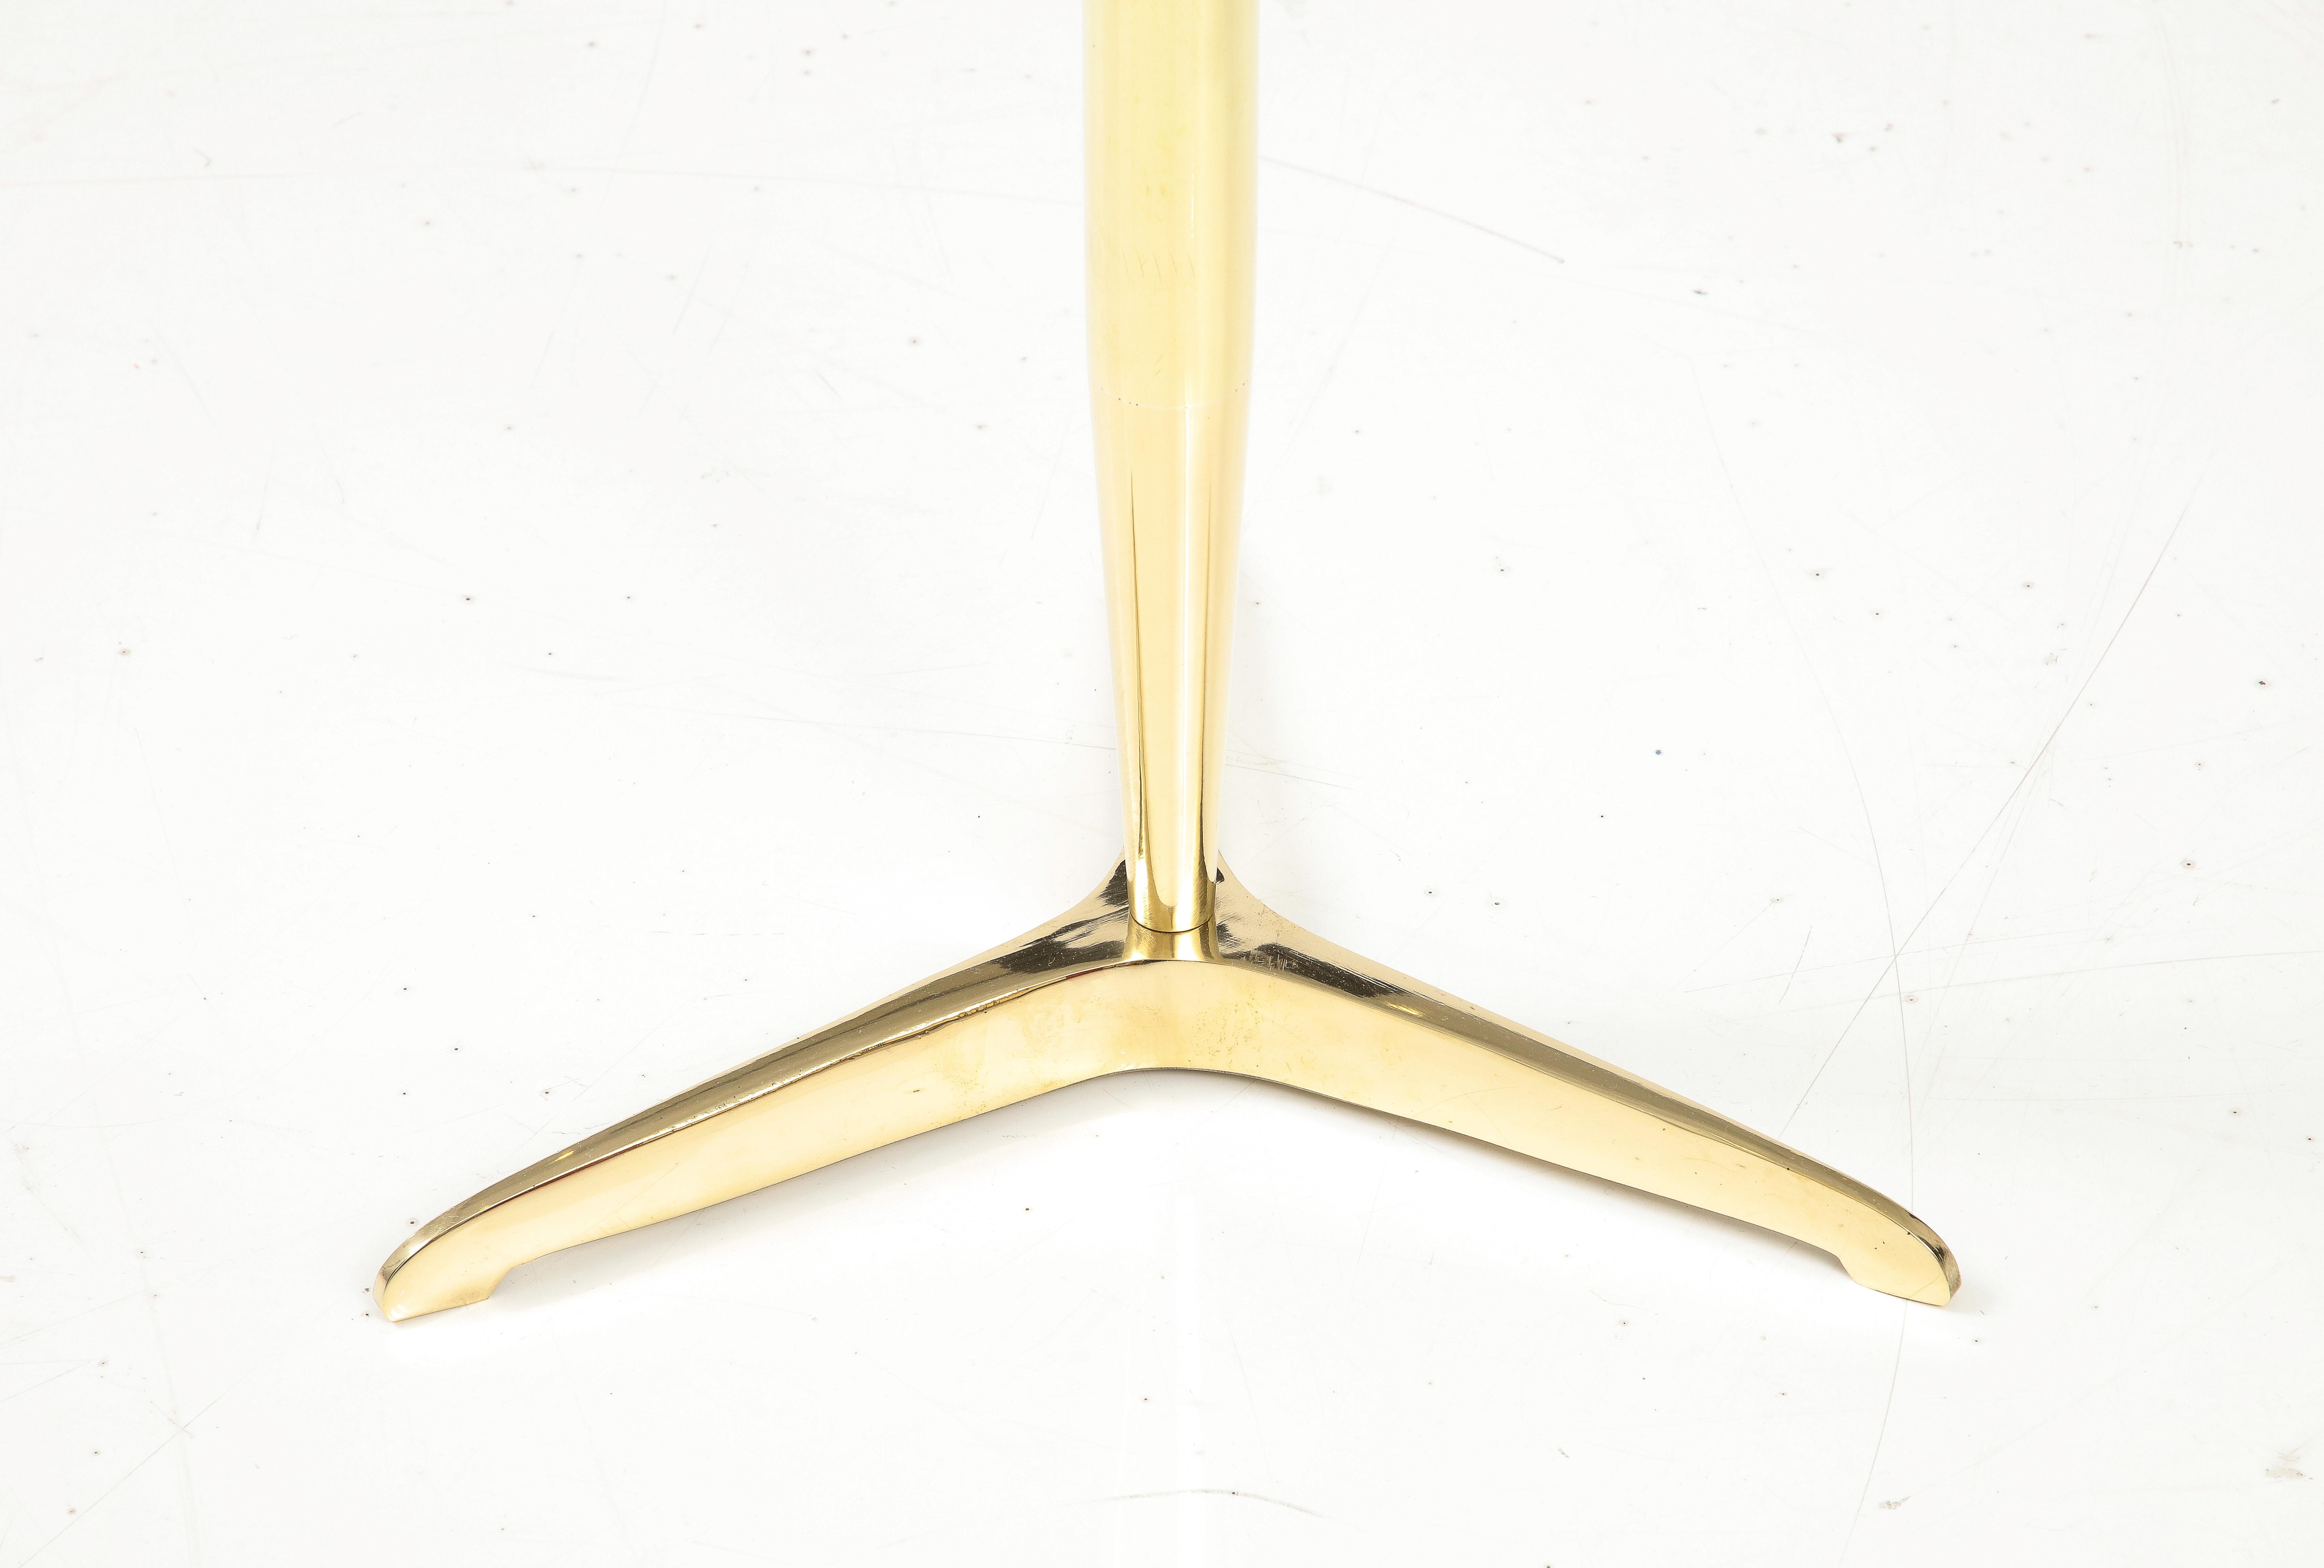 Occasional Martini drinks side table with thick beveled glass and patinated brass tripod base and small brass handle detail.  Handmade in Italy, 2022. This bespoke modern side or martini table is handcrafted with thick lens cut polished beveled